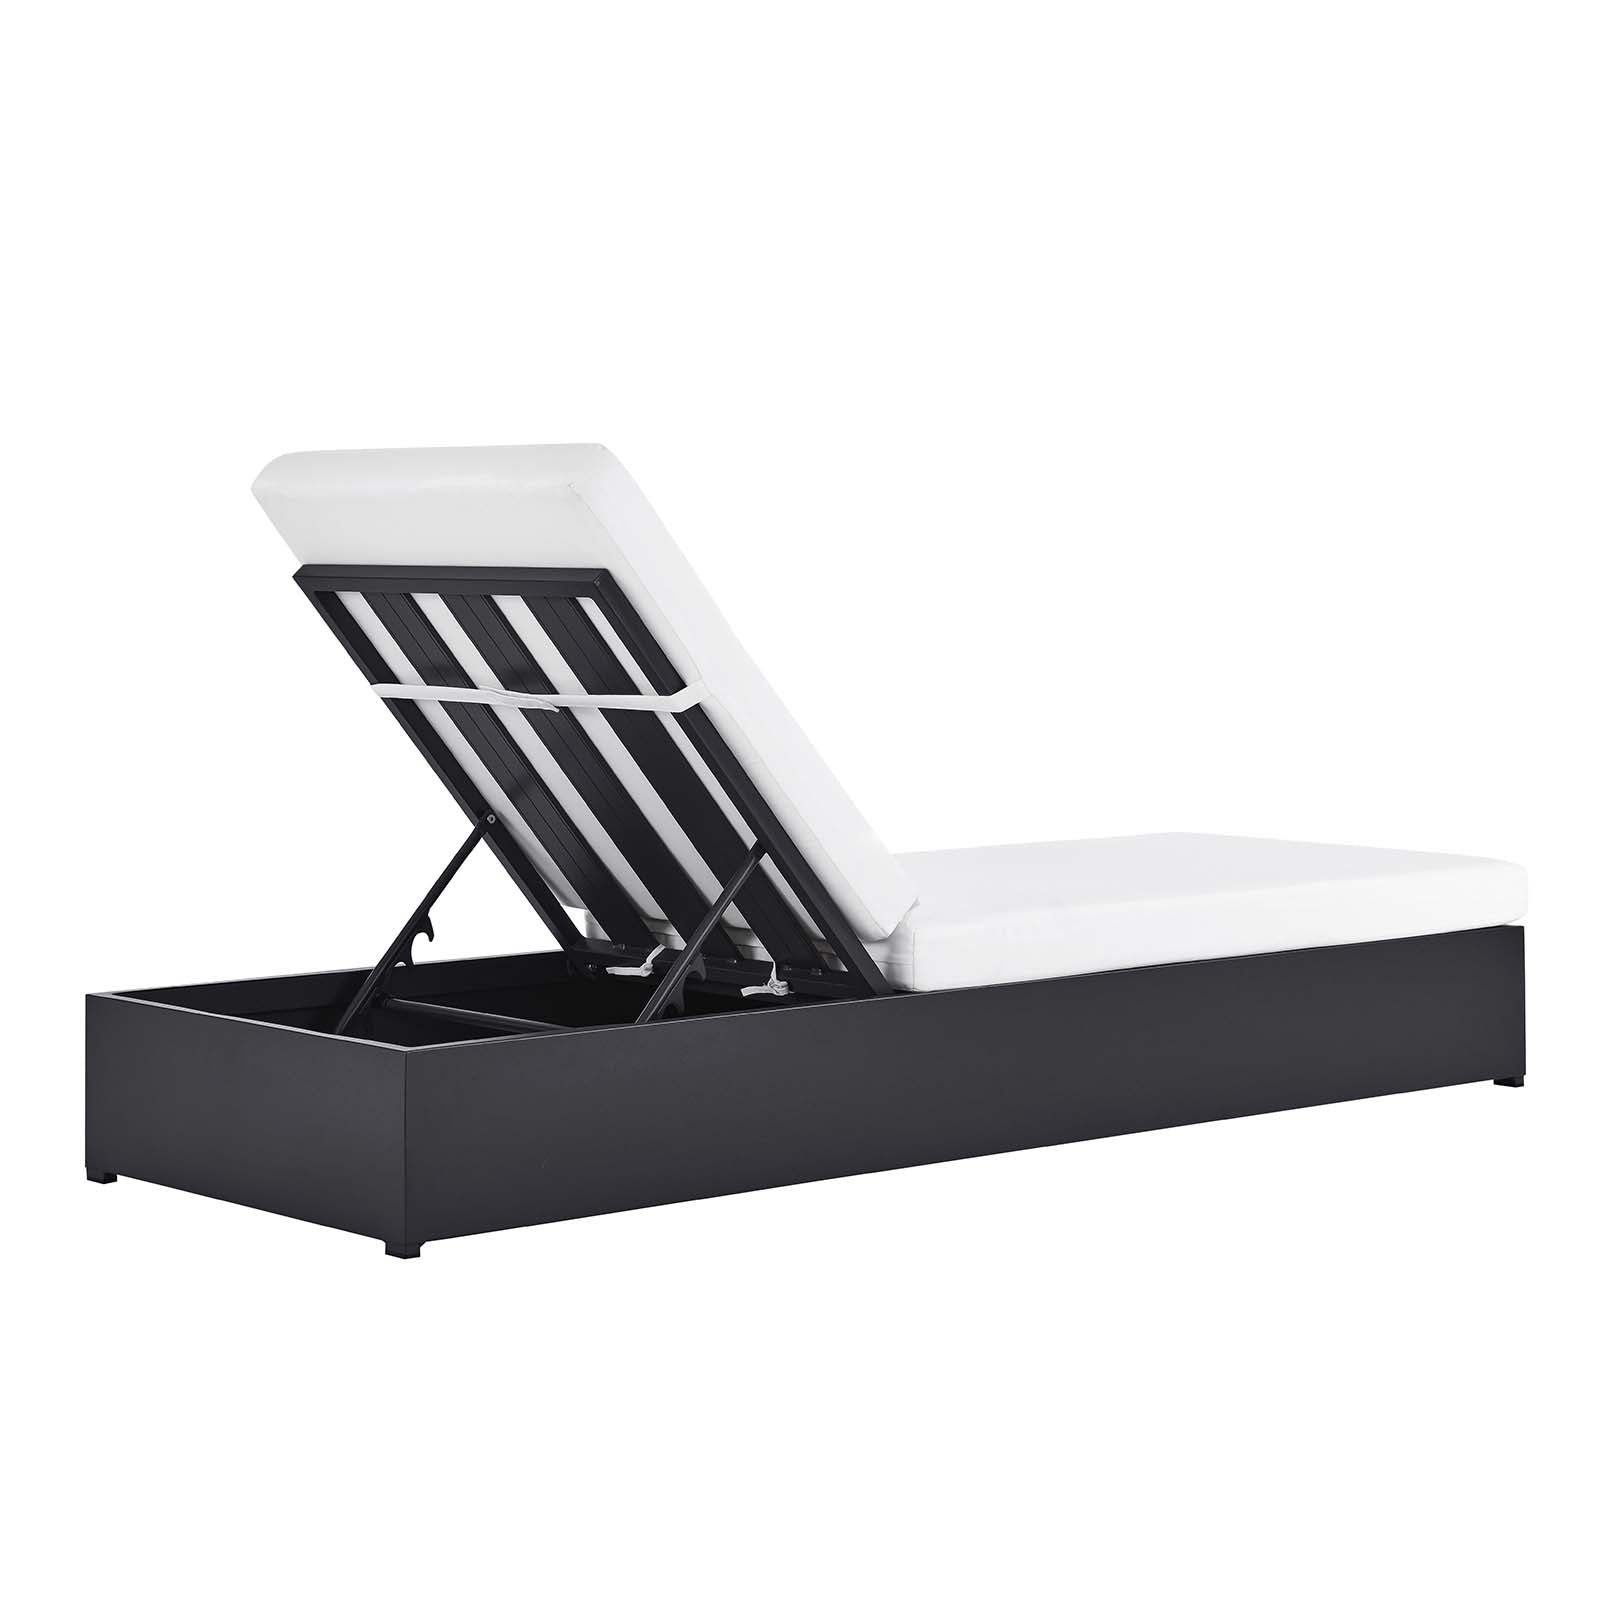 Tahoe Outdoor Patio Powder-Coated Aluminum Chaise Lounge Chair - East Shore Modern Home Furnishings